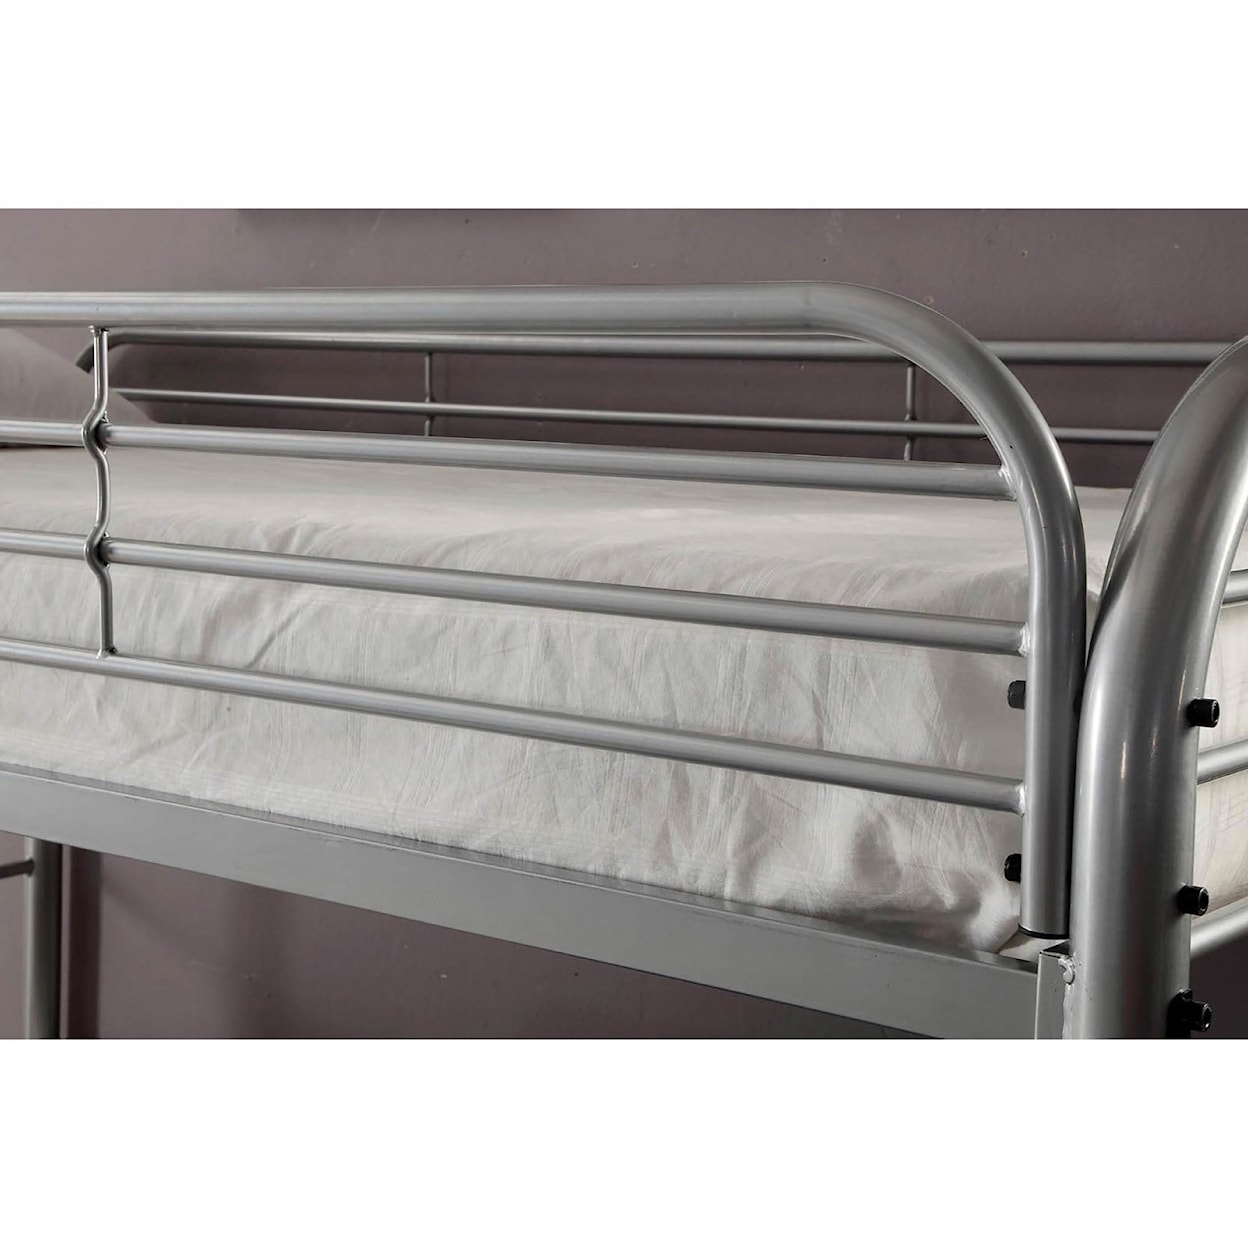 Furniture of America Opal Twin-over-Full Bunk Bed